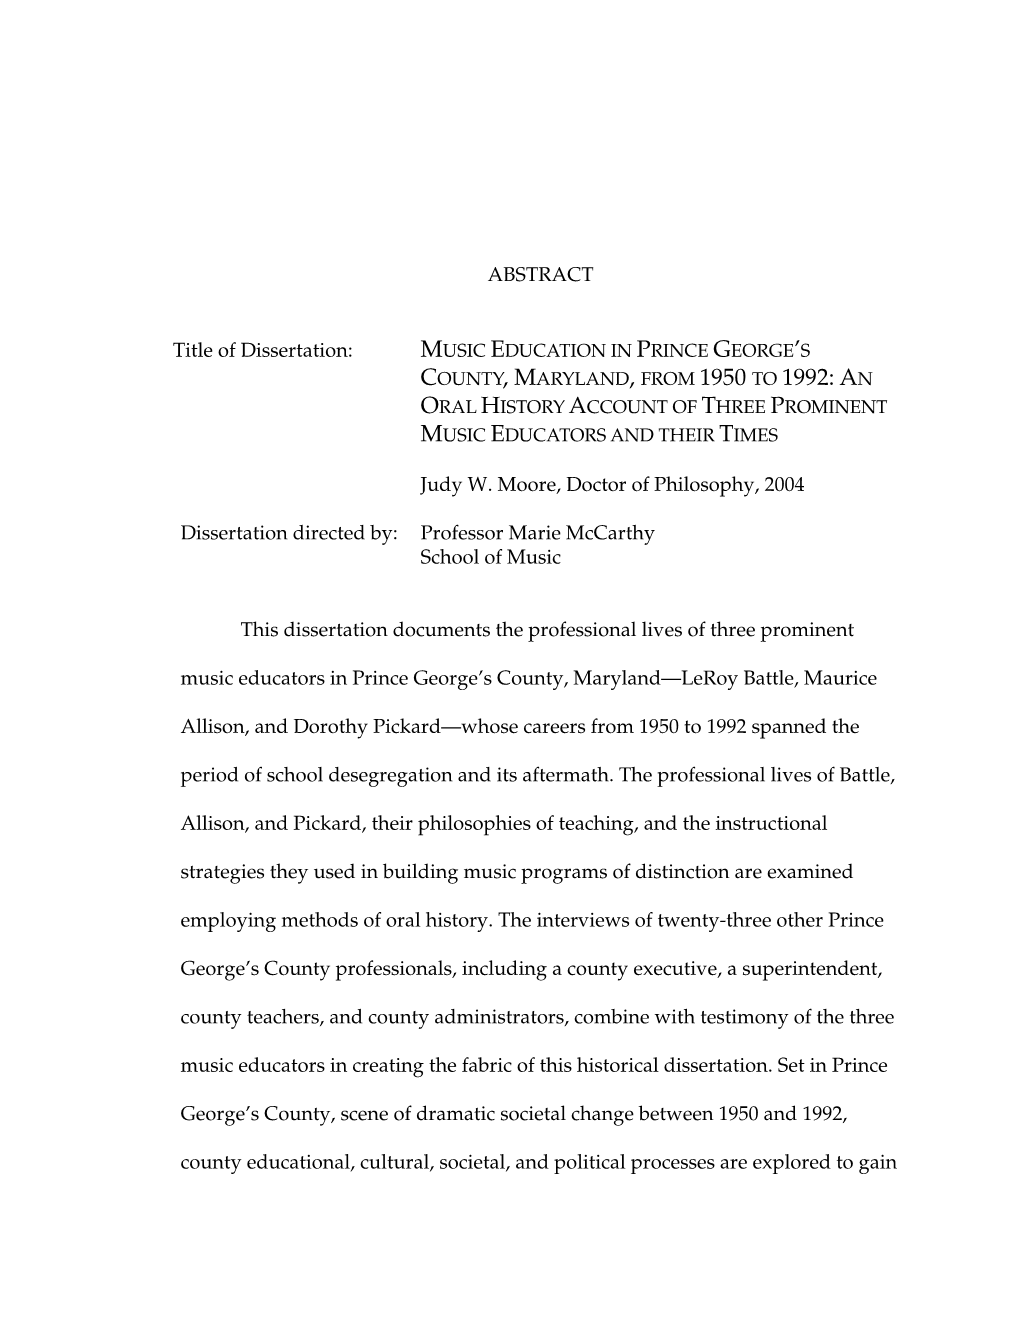 Judy W. Moore, Doctor of Philosophy, 2004 Dissertation Directed By